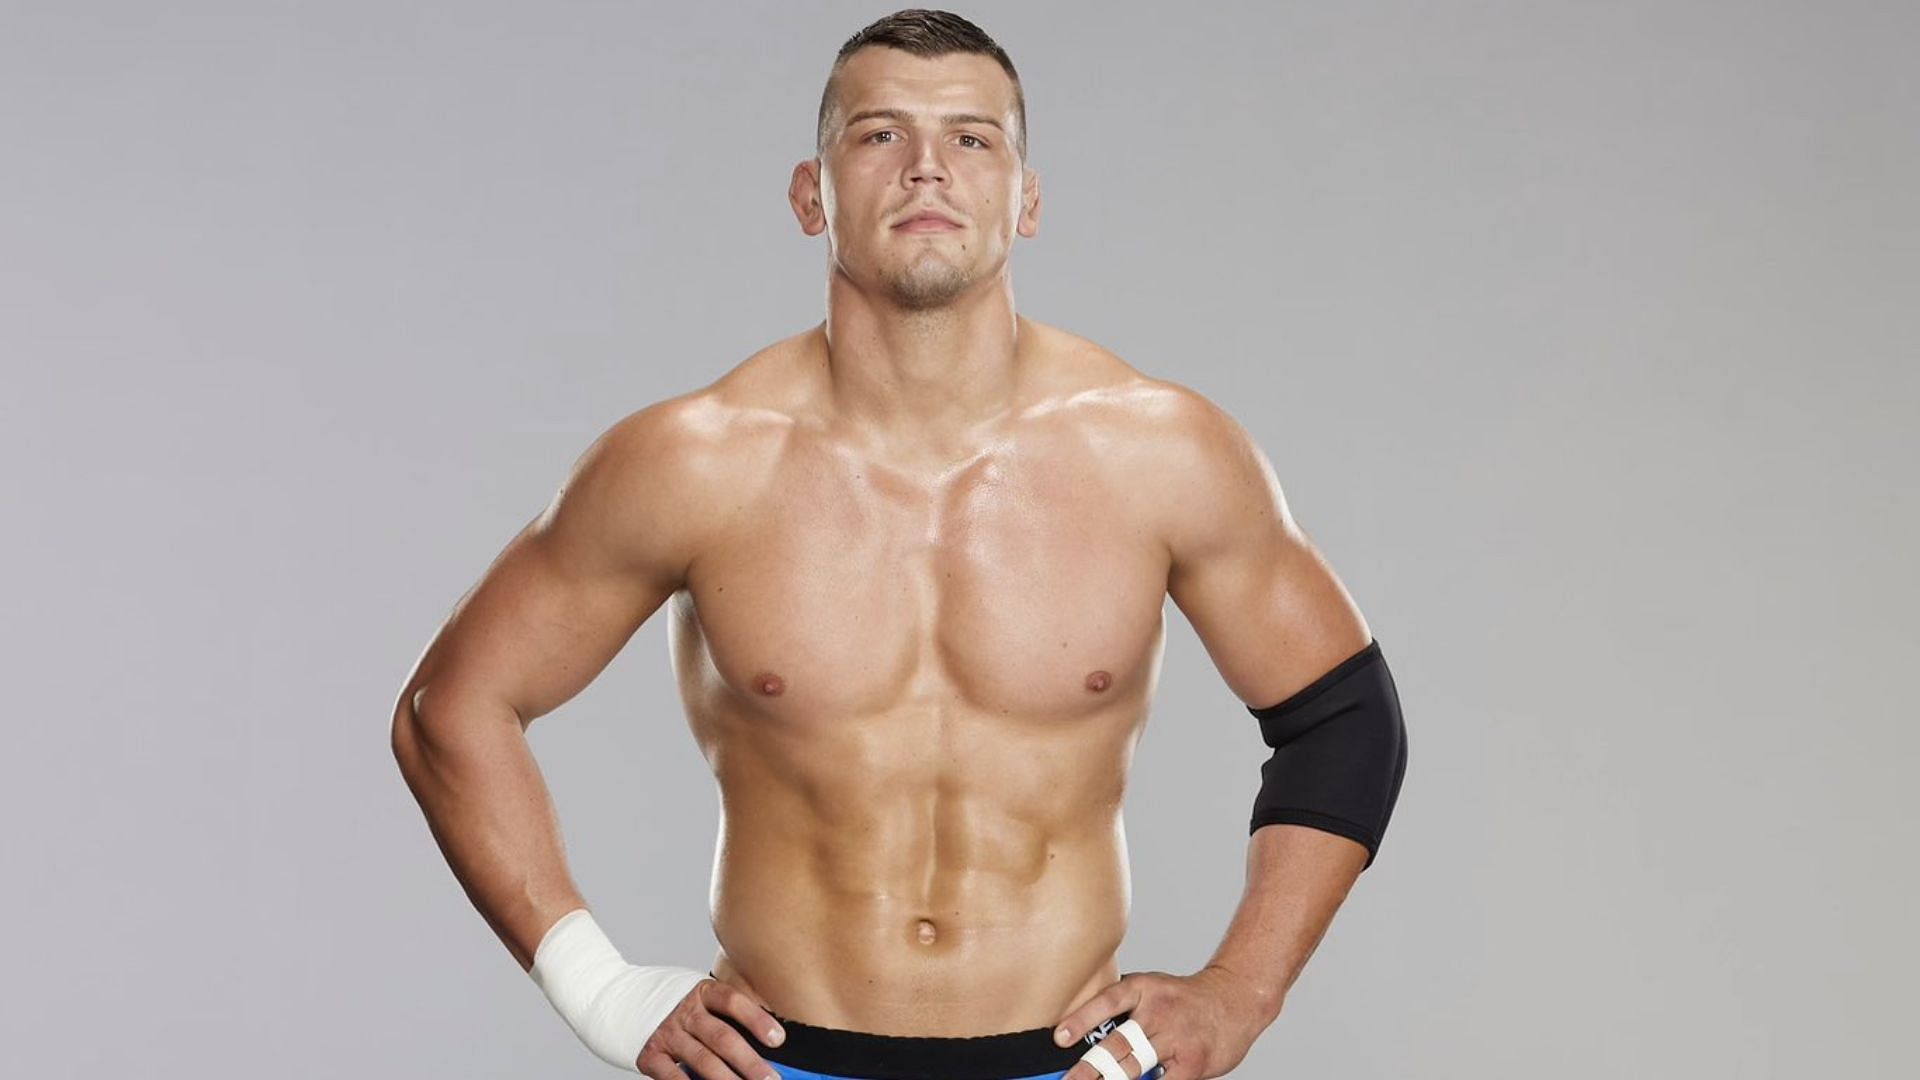 What is next for Julius Creed in WWE?